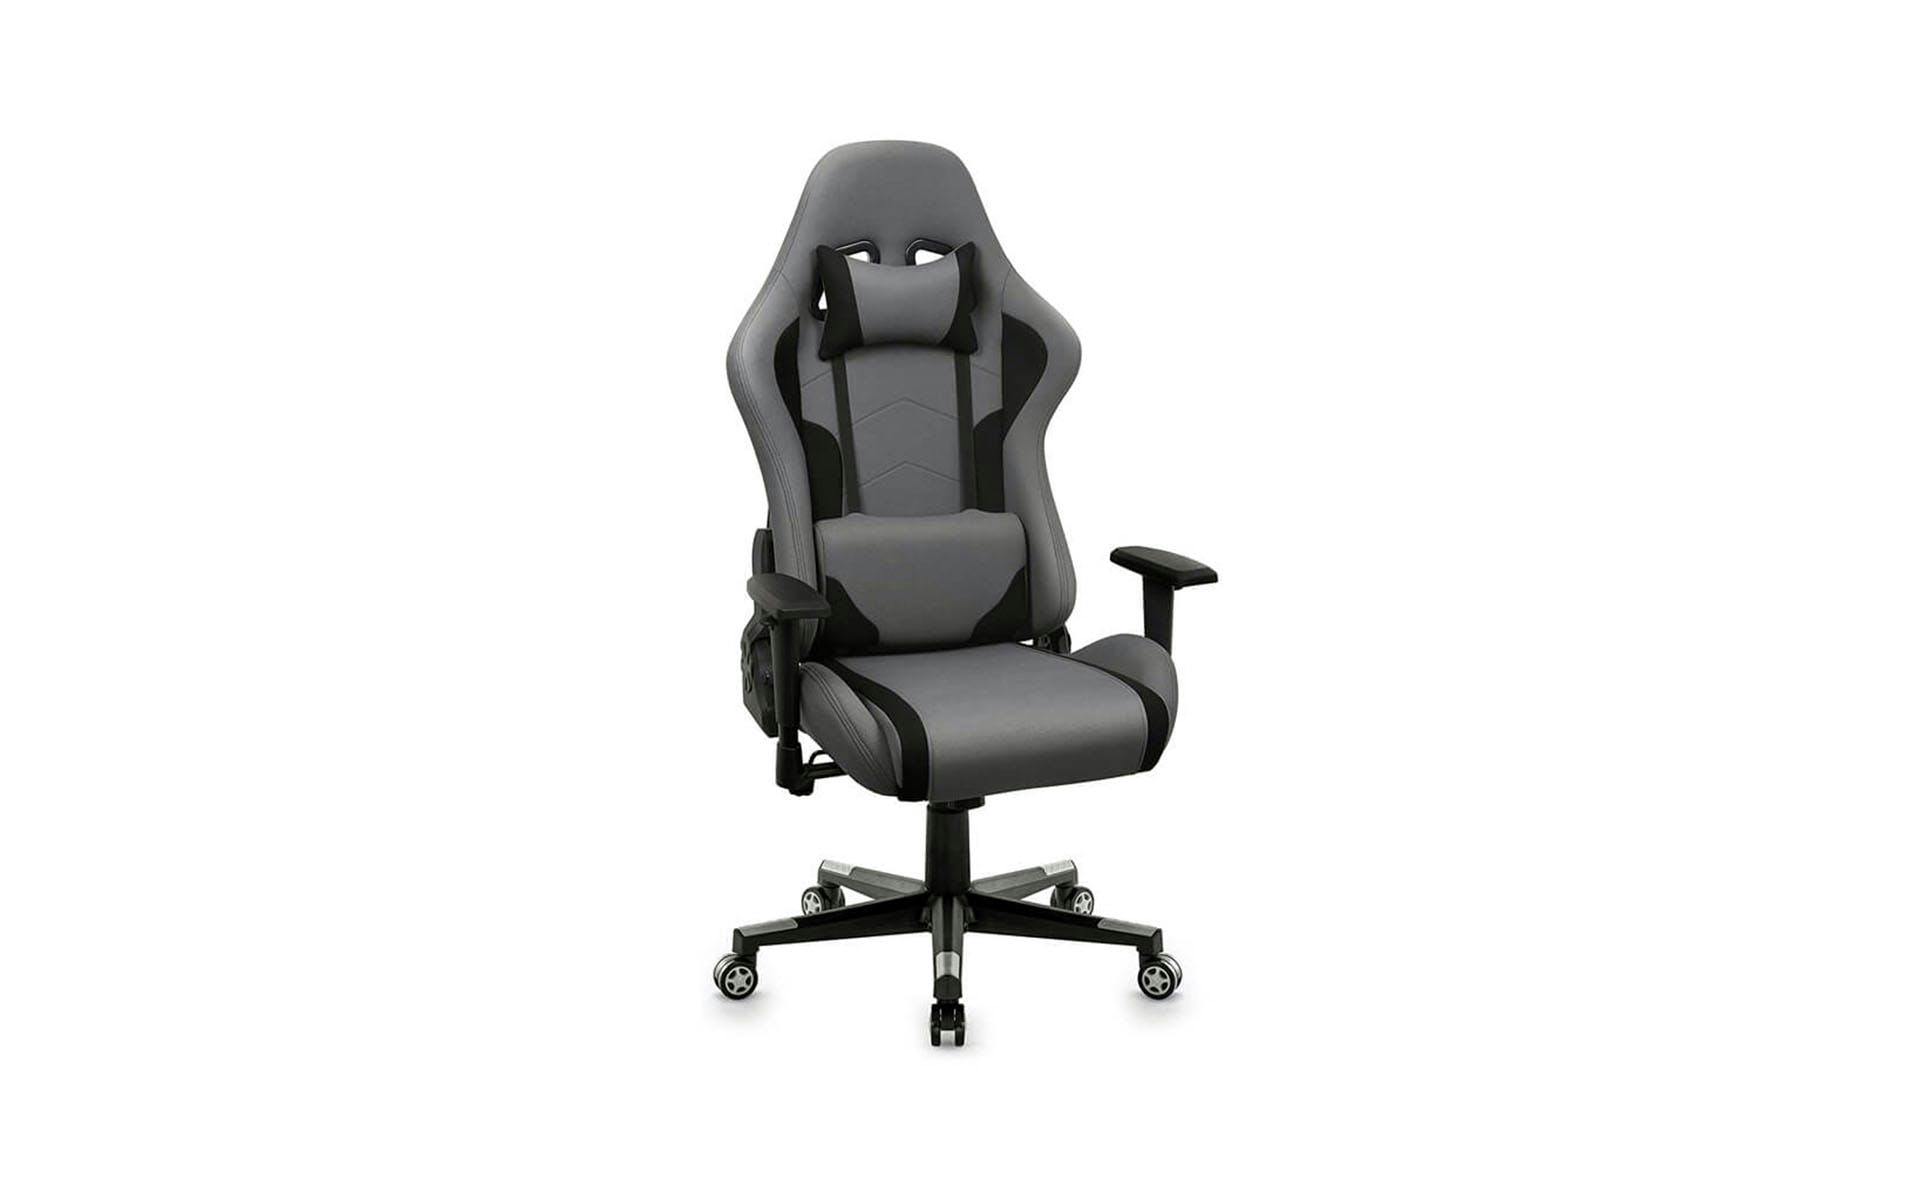 Gray and black gaming chair in a classic "Racing" shape.